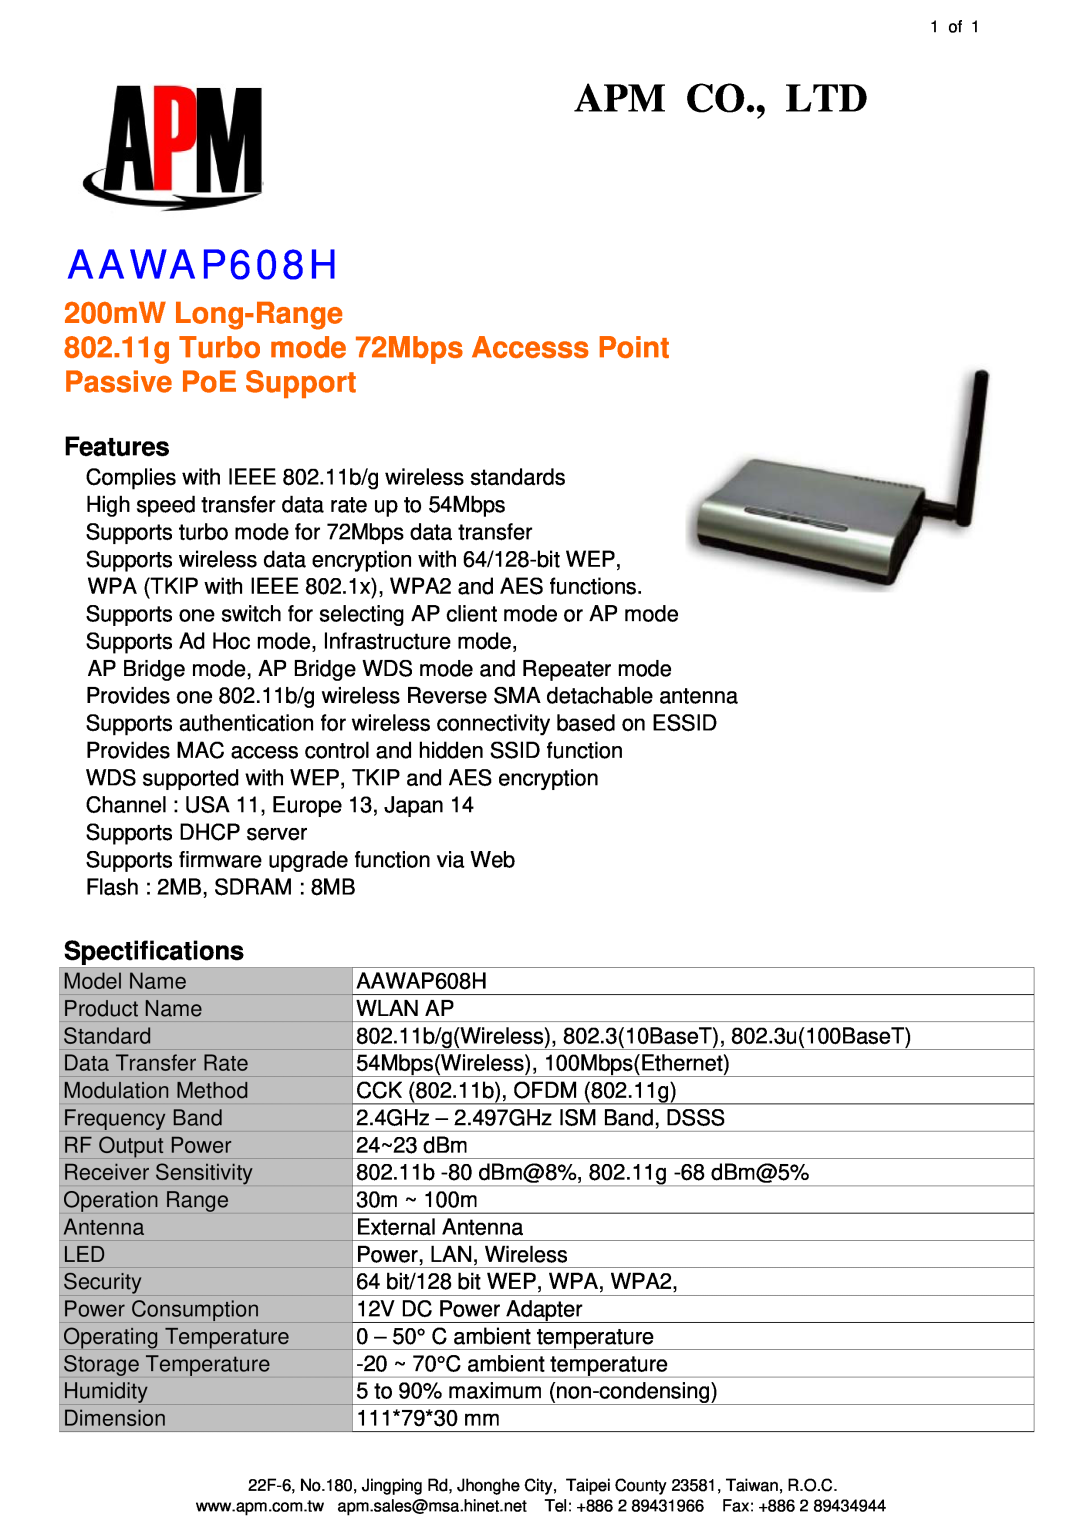 APM AAWAP608H manual 200mW Long-Range, 802.11g Turbo mode 72Mbps Accesss Point Passive PoE Support, Features 